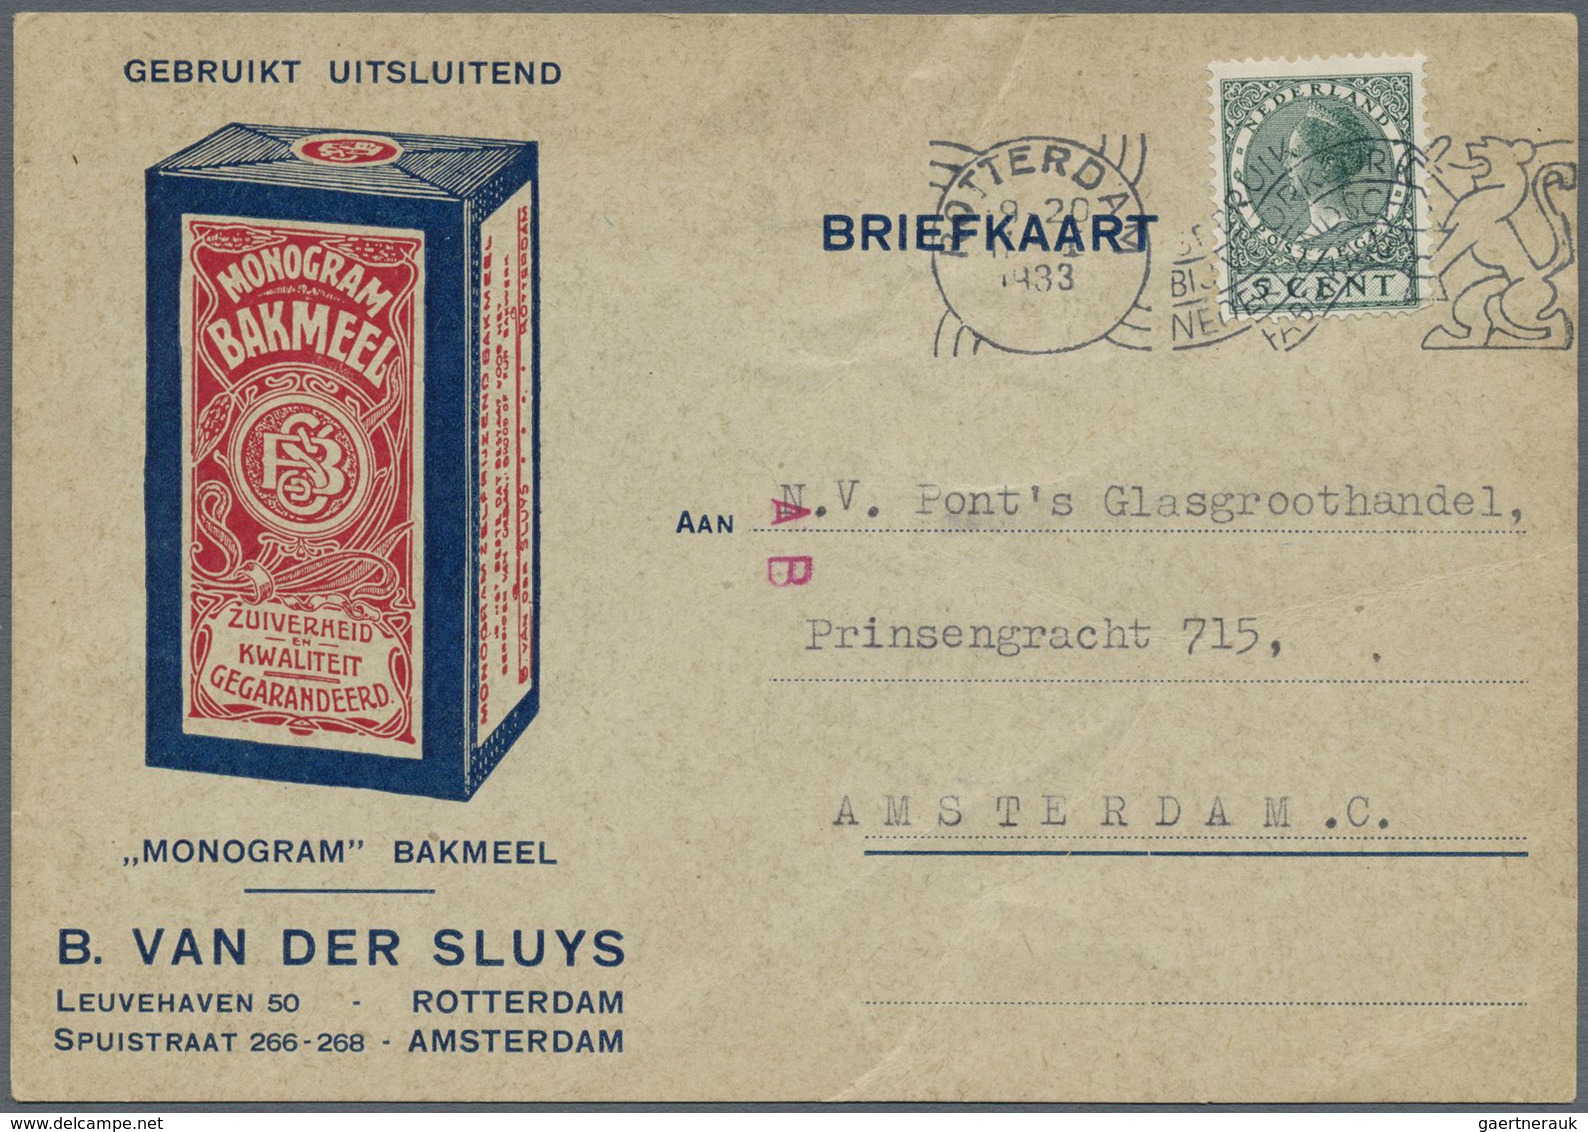 Br/GA/ Niederlande: 1877/1957, Netherlands/colonies, holding of apprx. 140 covers/cards/stationeries/ppc wi